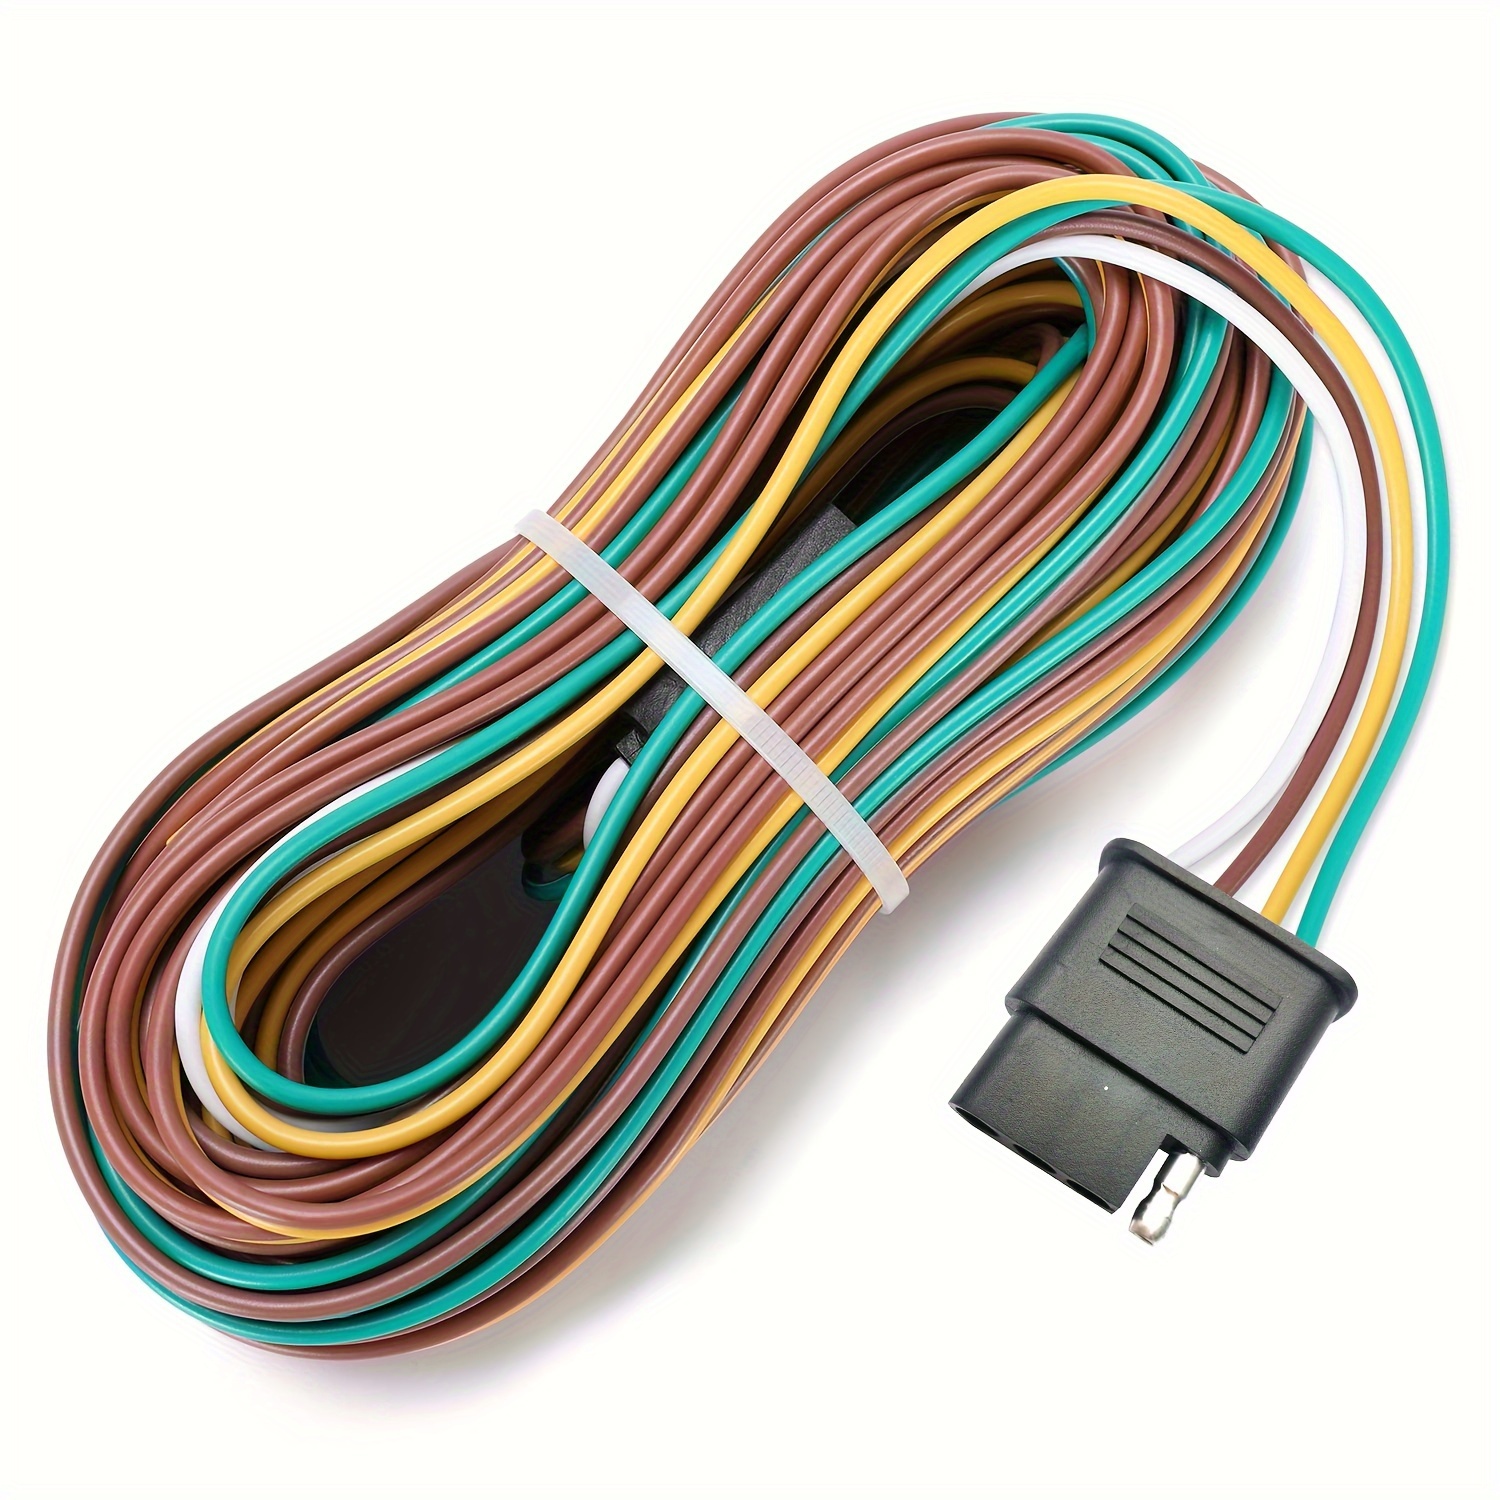 

4 Wire 4-flat Trailer Light Wiring Harness Kit - 25ft/760cm/299inch With 4 Flat Extension Connector - 36v Or Below Voltage - Copper Material